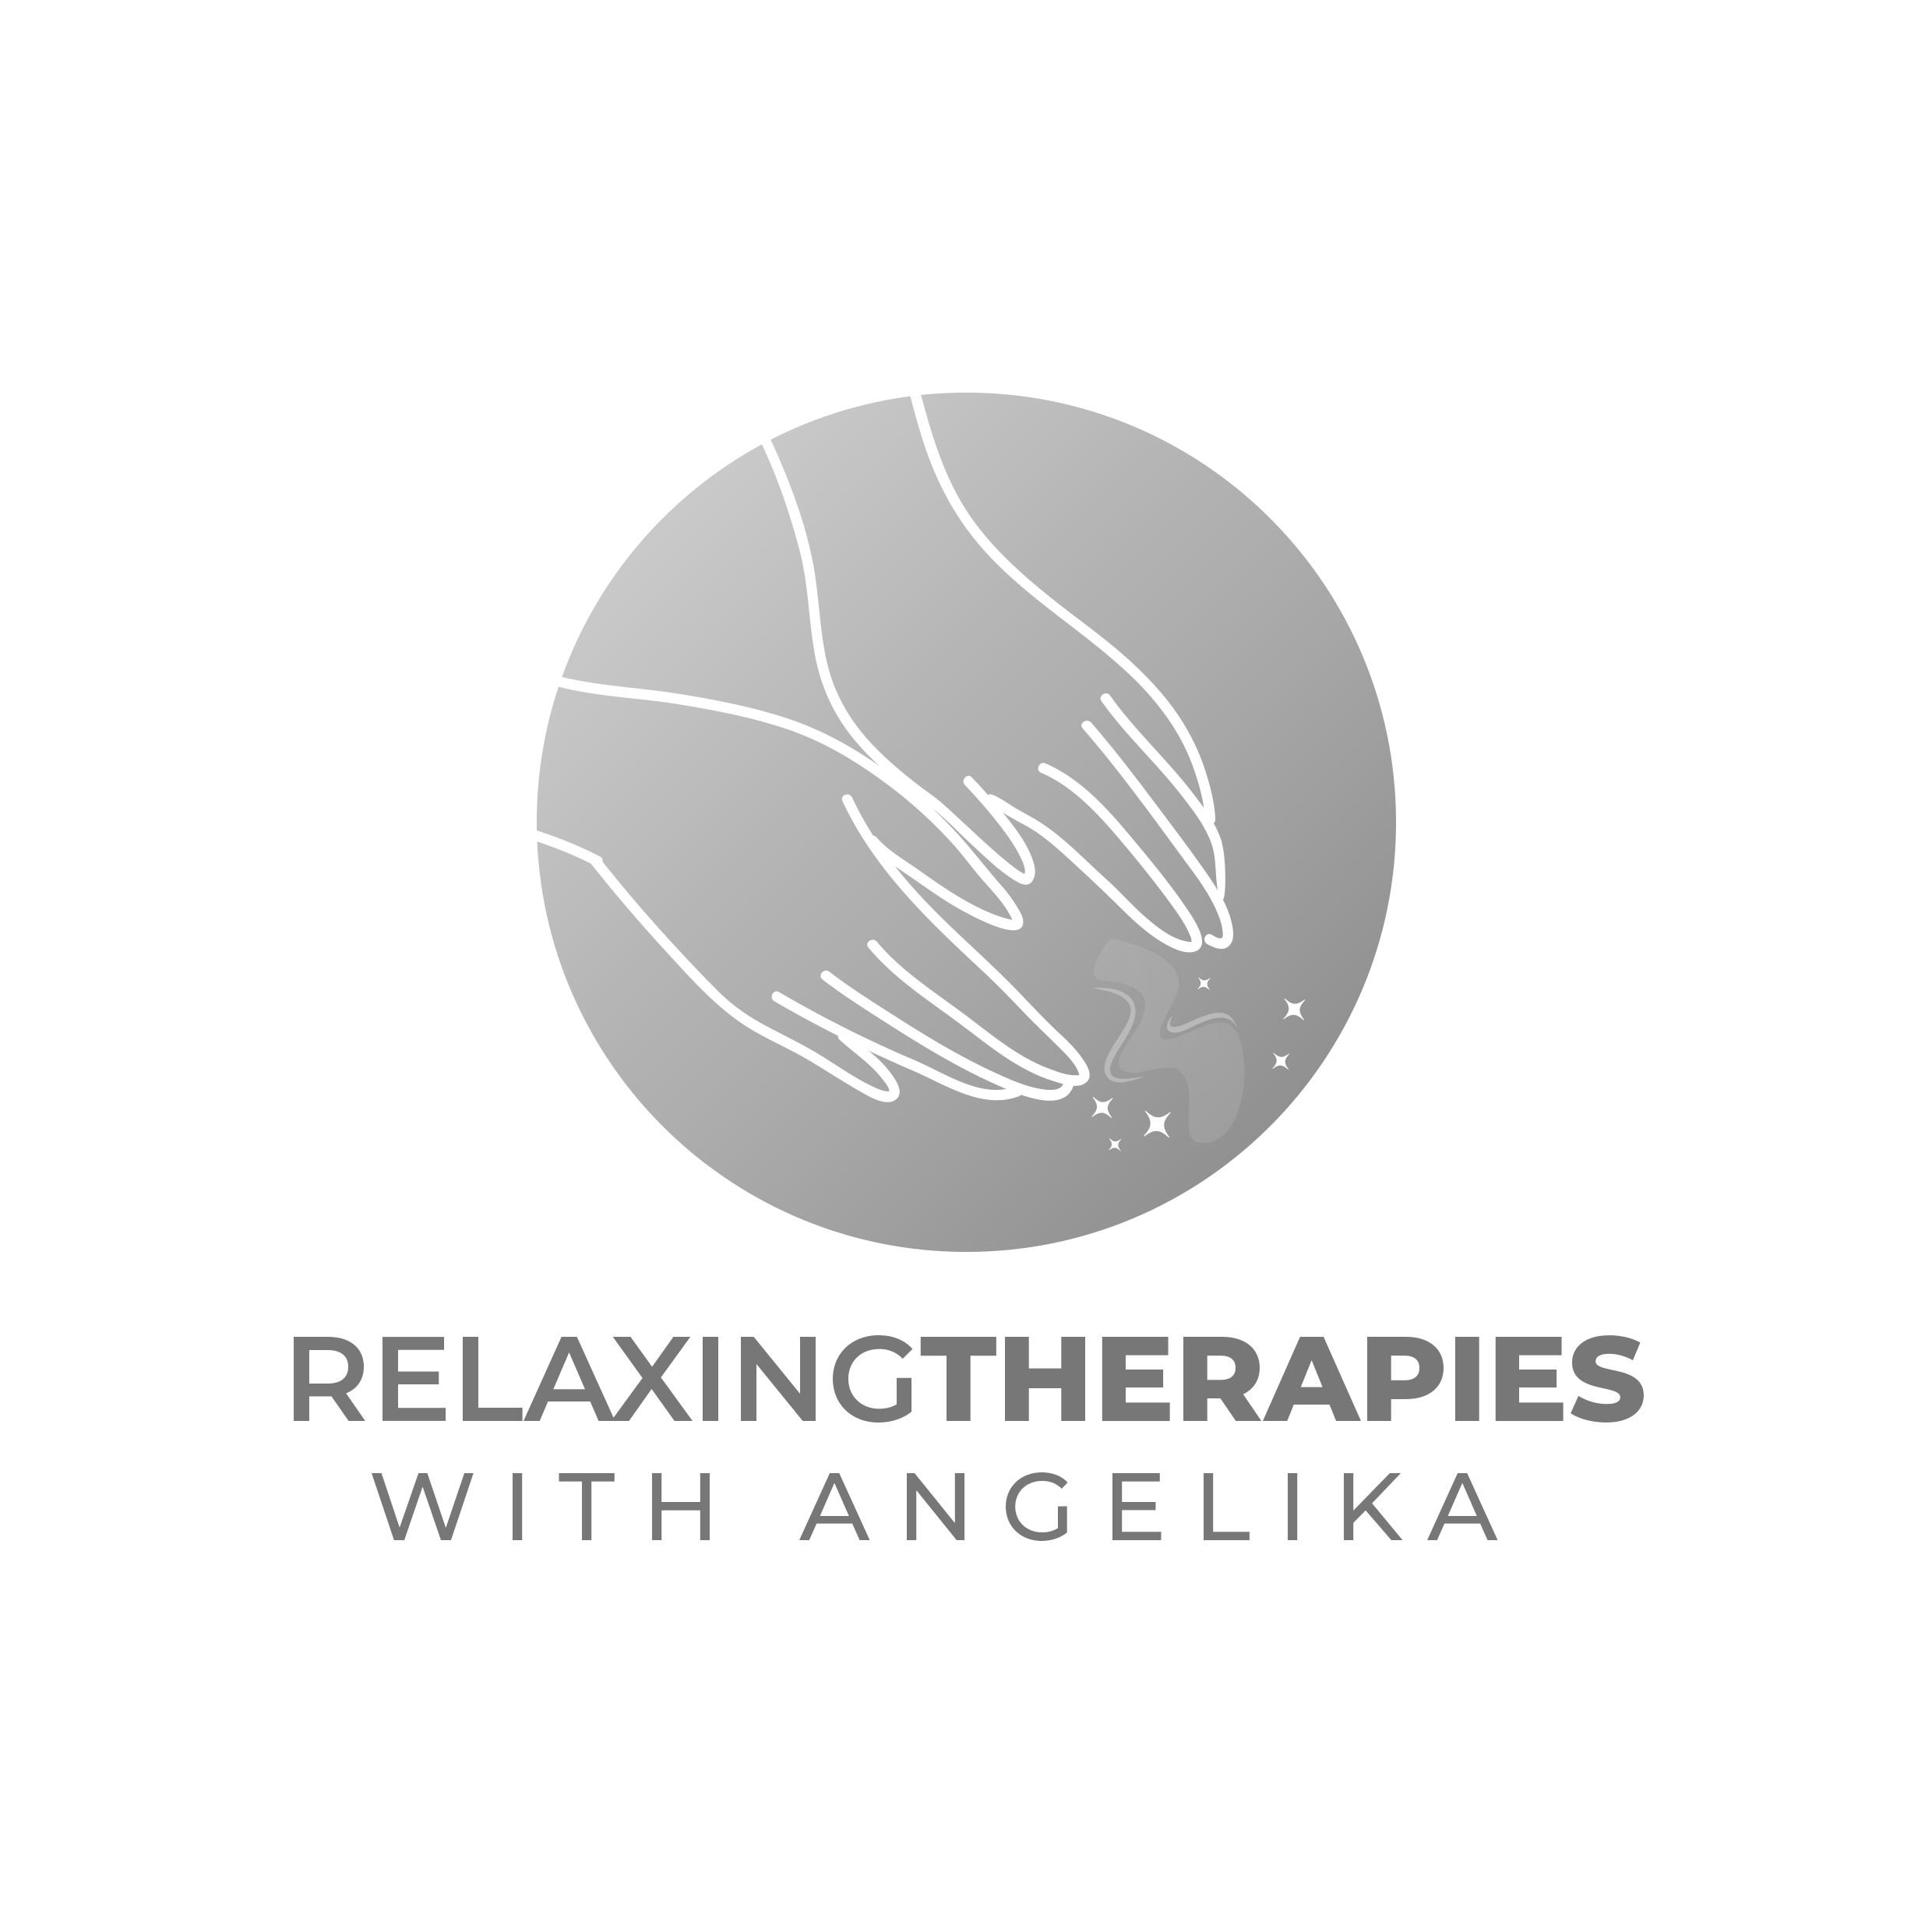 relaxing-therapies-1-1-1-1-1-1.png